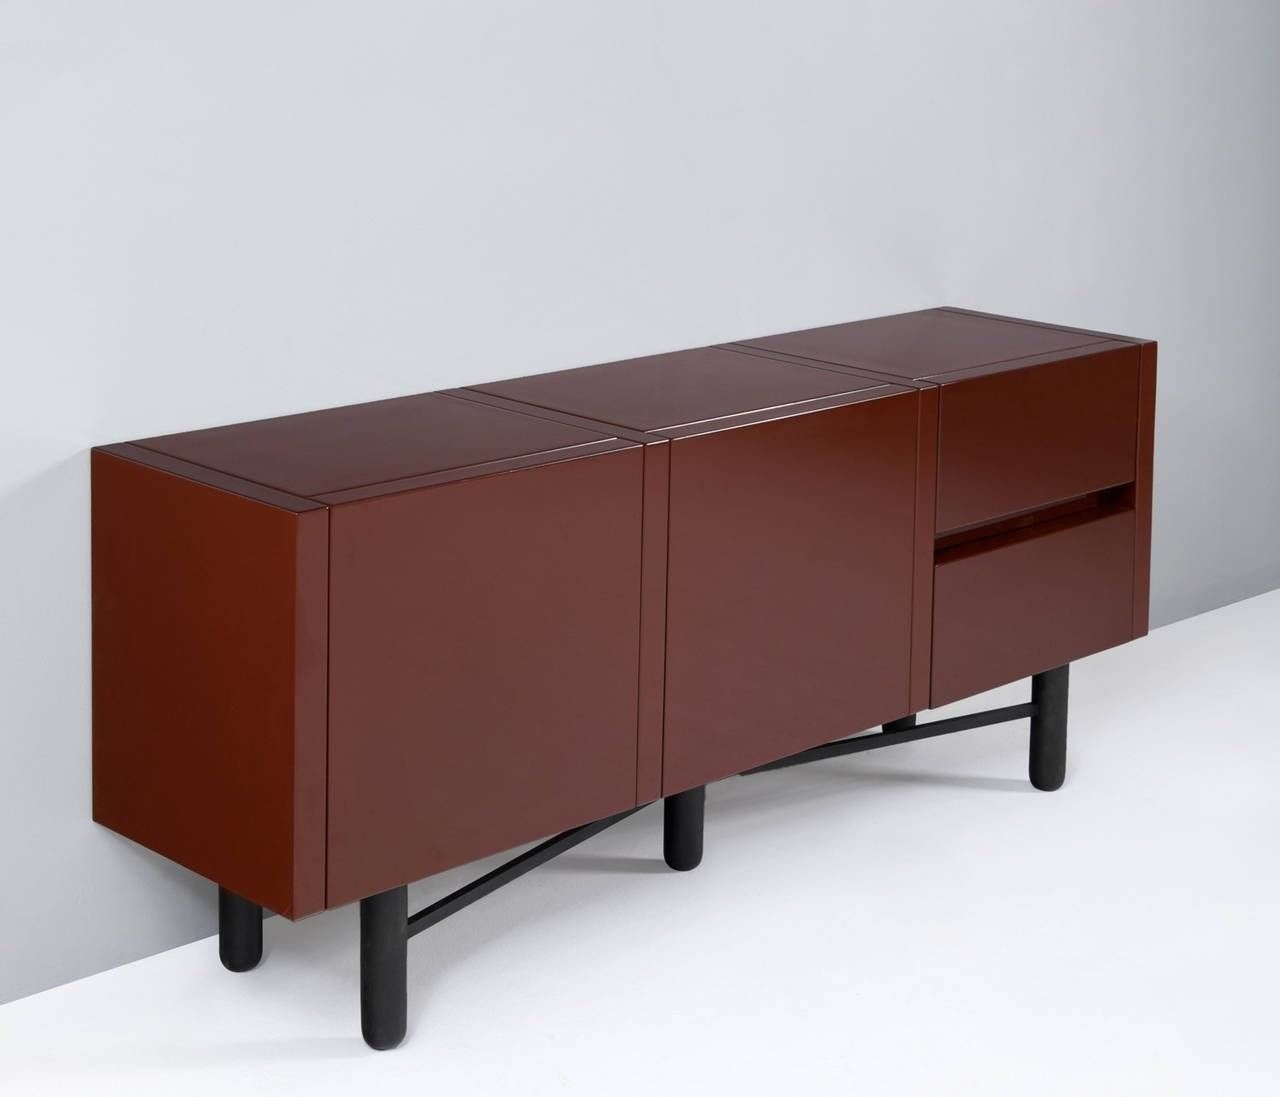 Roche Bobois Red Lacquered High Gloss Sideboard For Sale At 1stdibs Throughout High Gloss Black Sideboards (Photo 7 of 15)